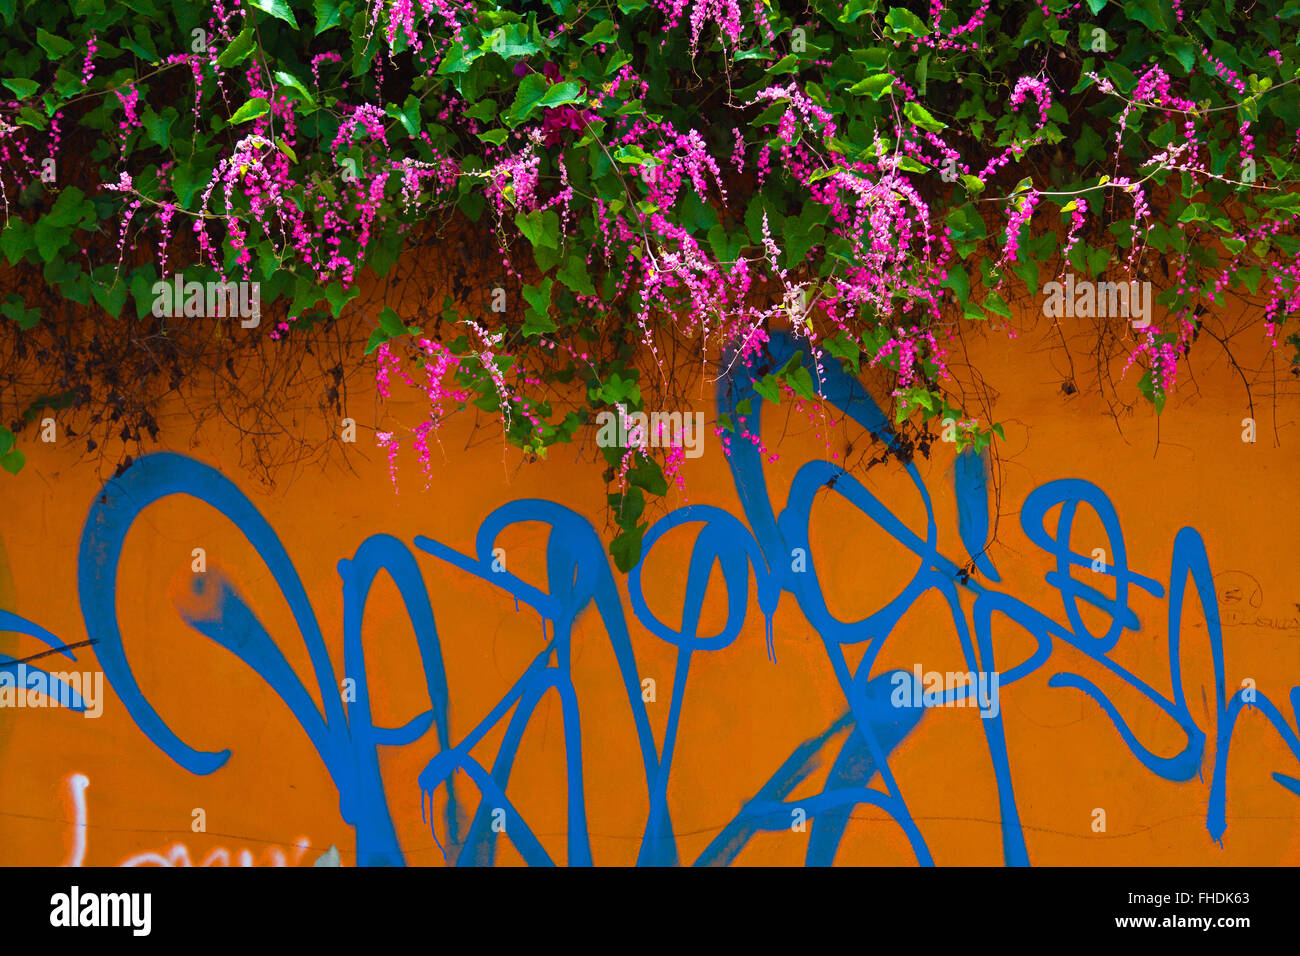 GRAFFITI ART is an important part of the local culture - OAXACA, MEXICO Stock Photo